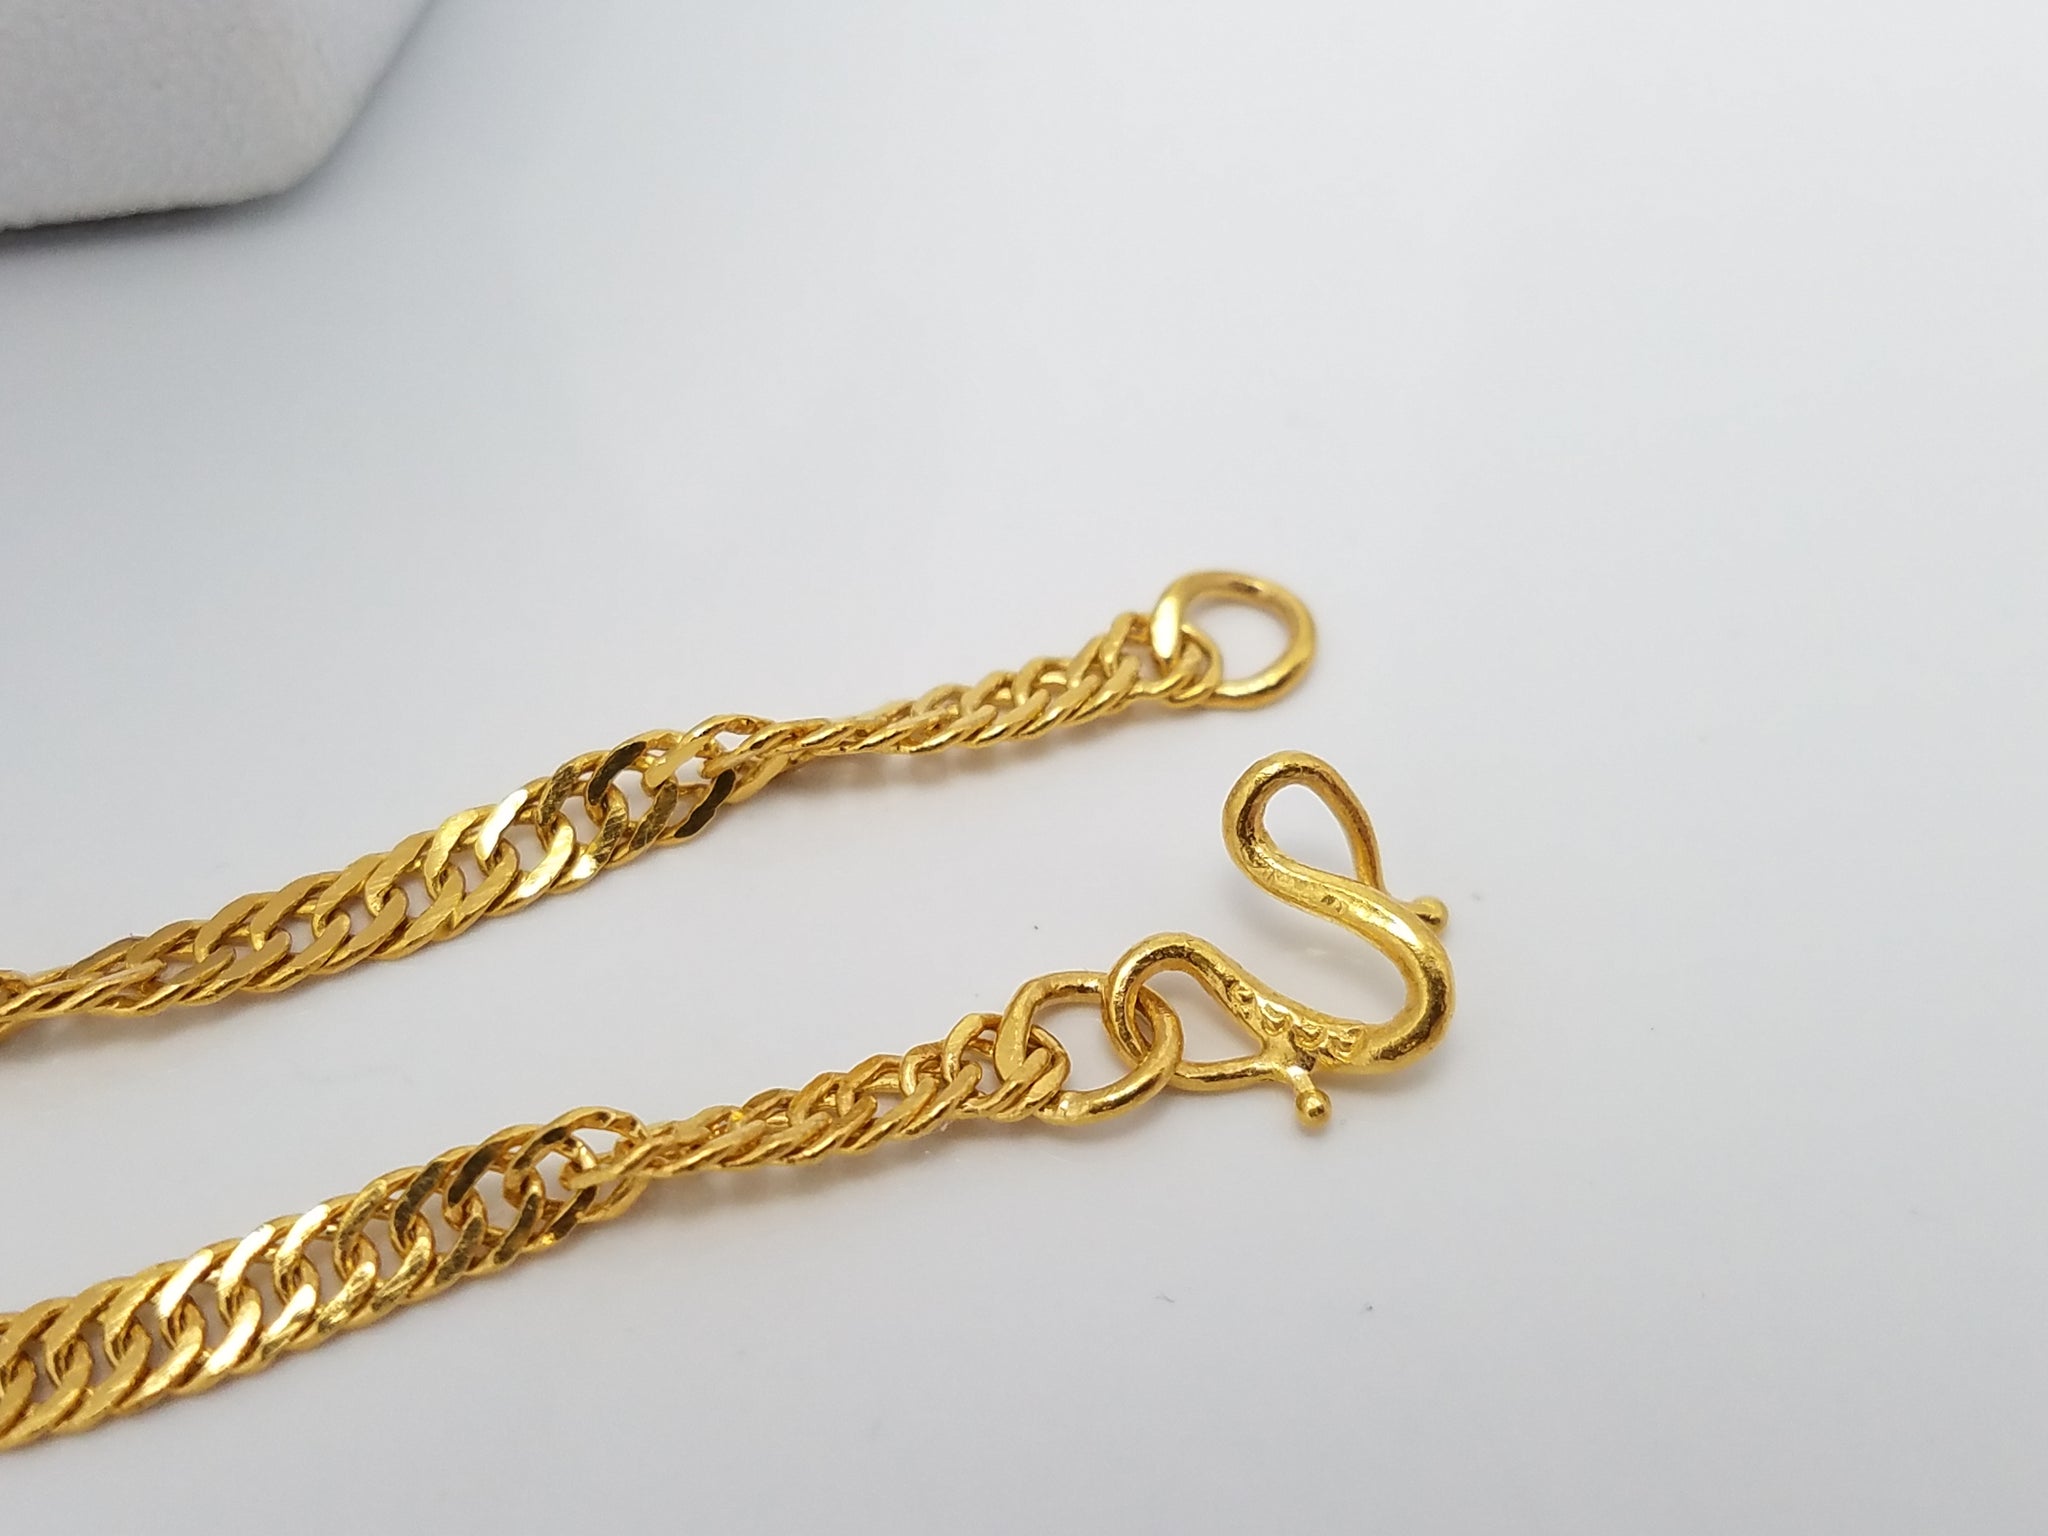 17" 24k Yellow Gold Singapore Link Chain Necklace